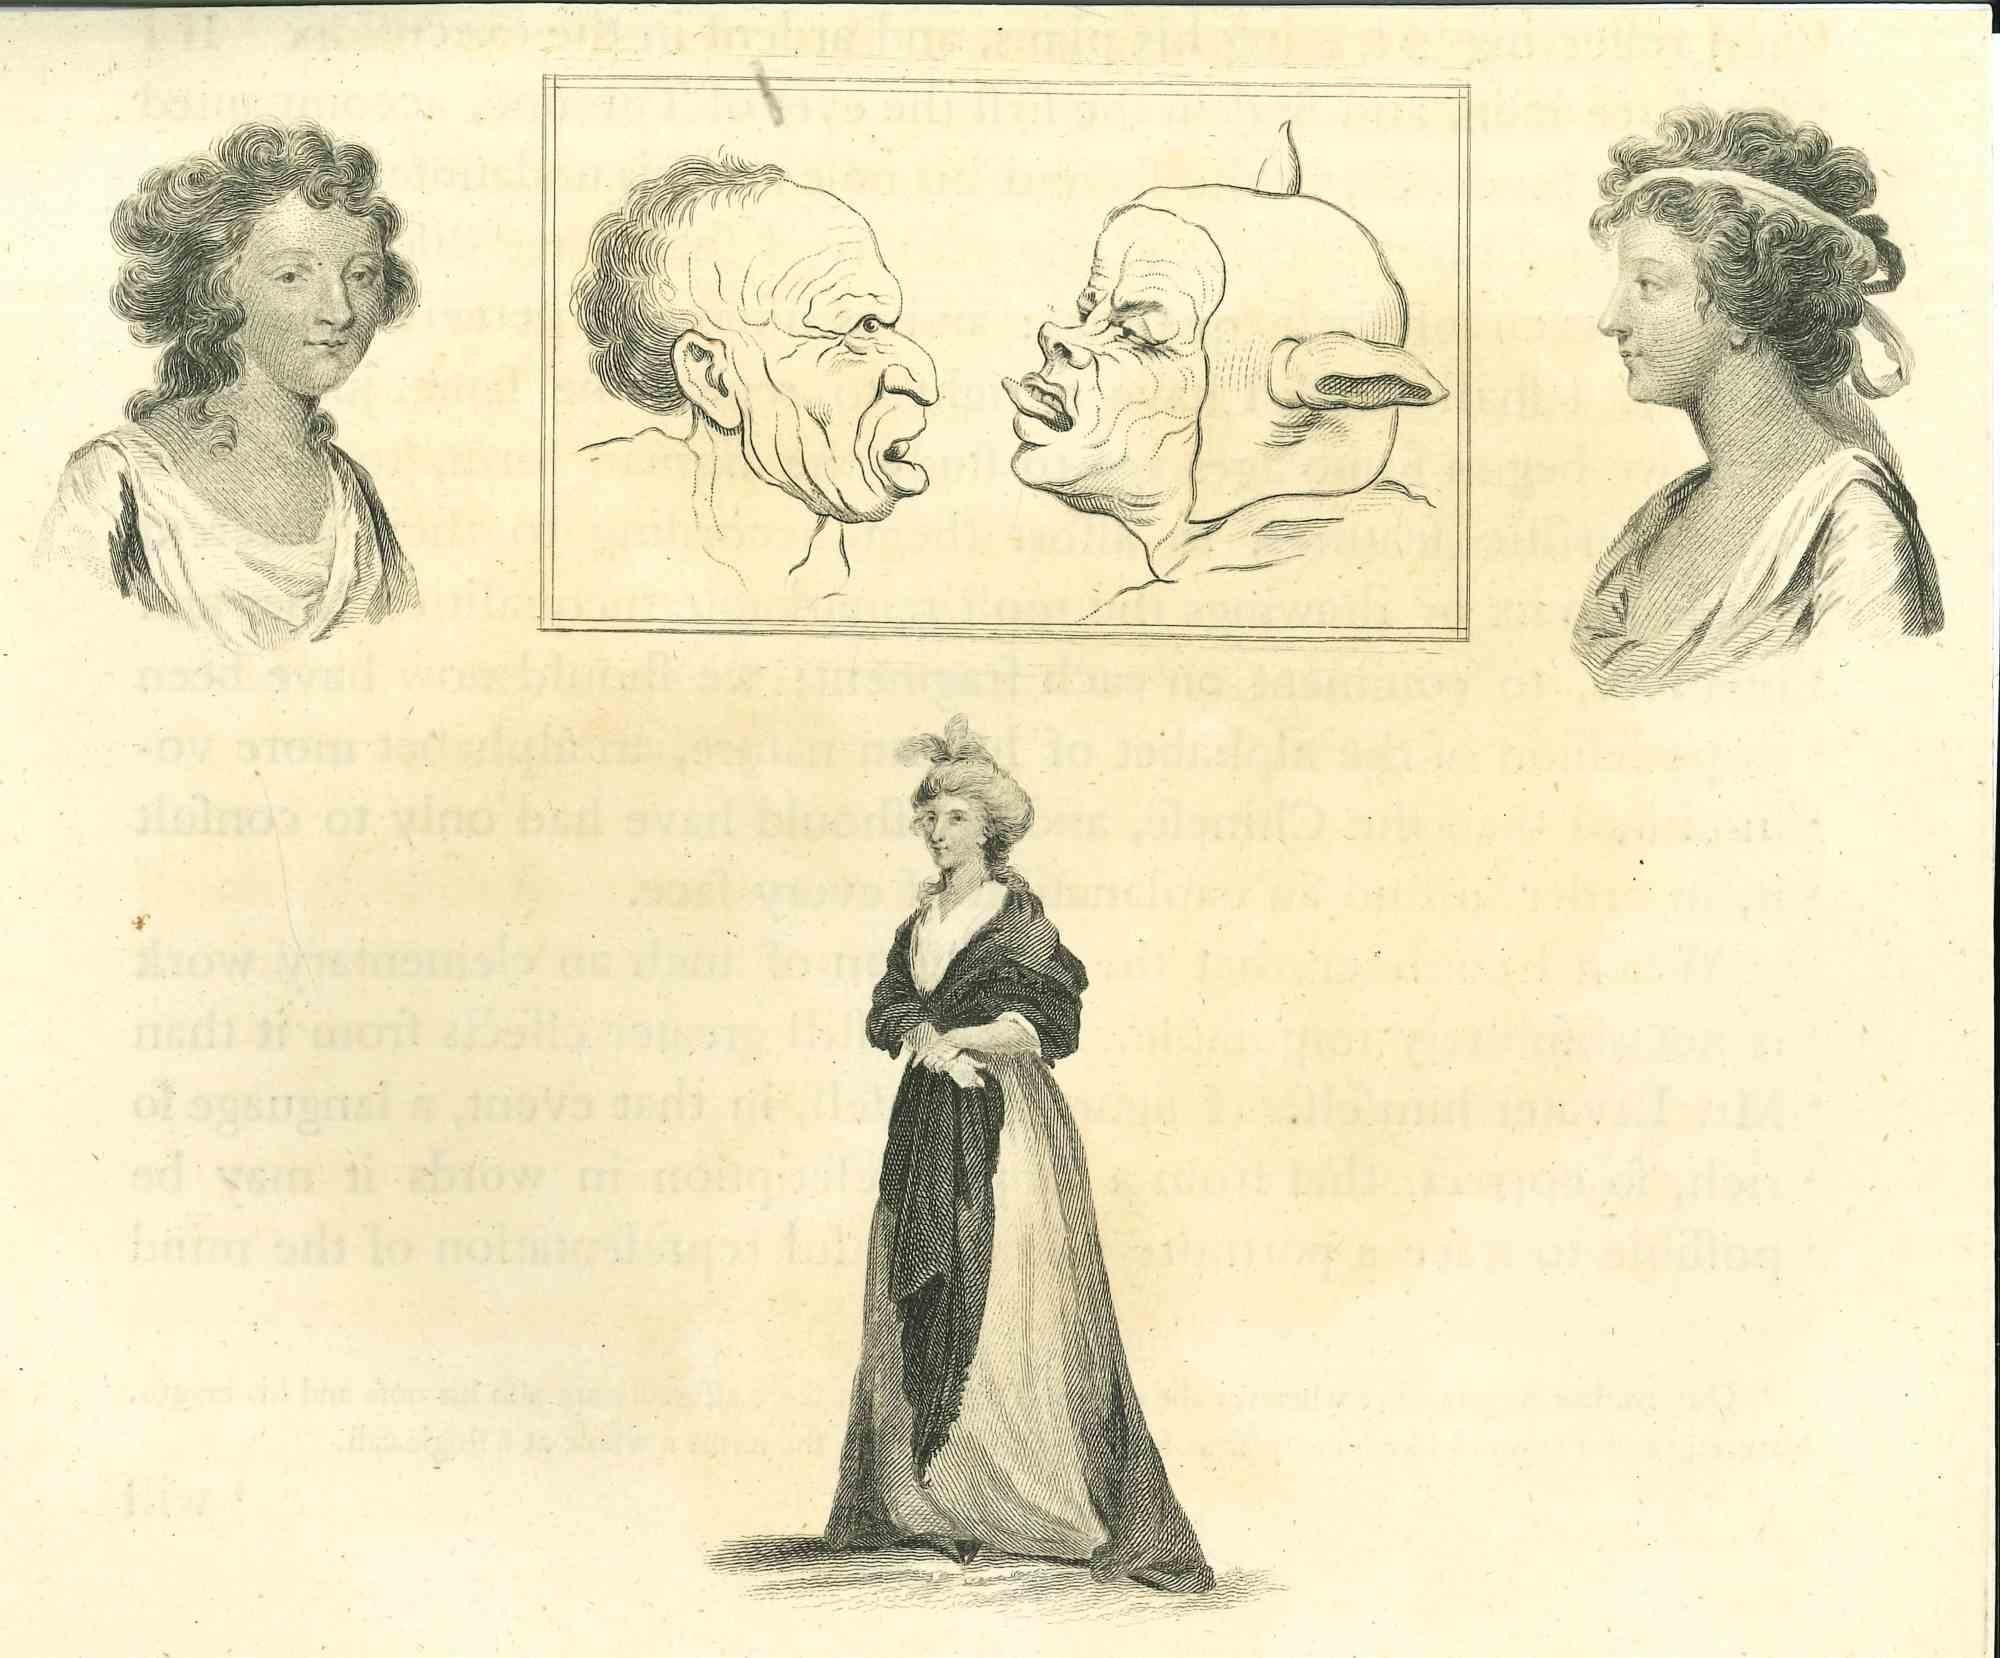 Profiles is an original artwork realized by Thomas Holloway for Johann Caspar Lavater's  "Essays on Physiognomy, Designed to promote the Knowledge and the Love of Mankind", London, Bensley, 1810. 

 This artwork portrays profiles of men and women.